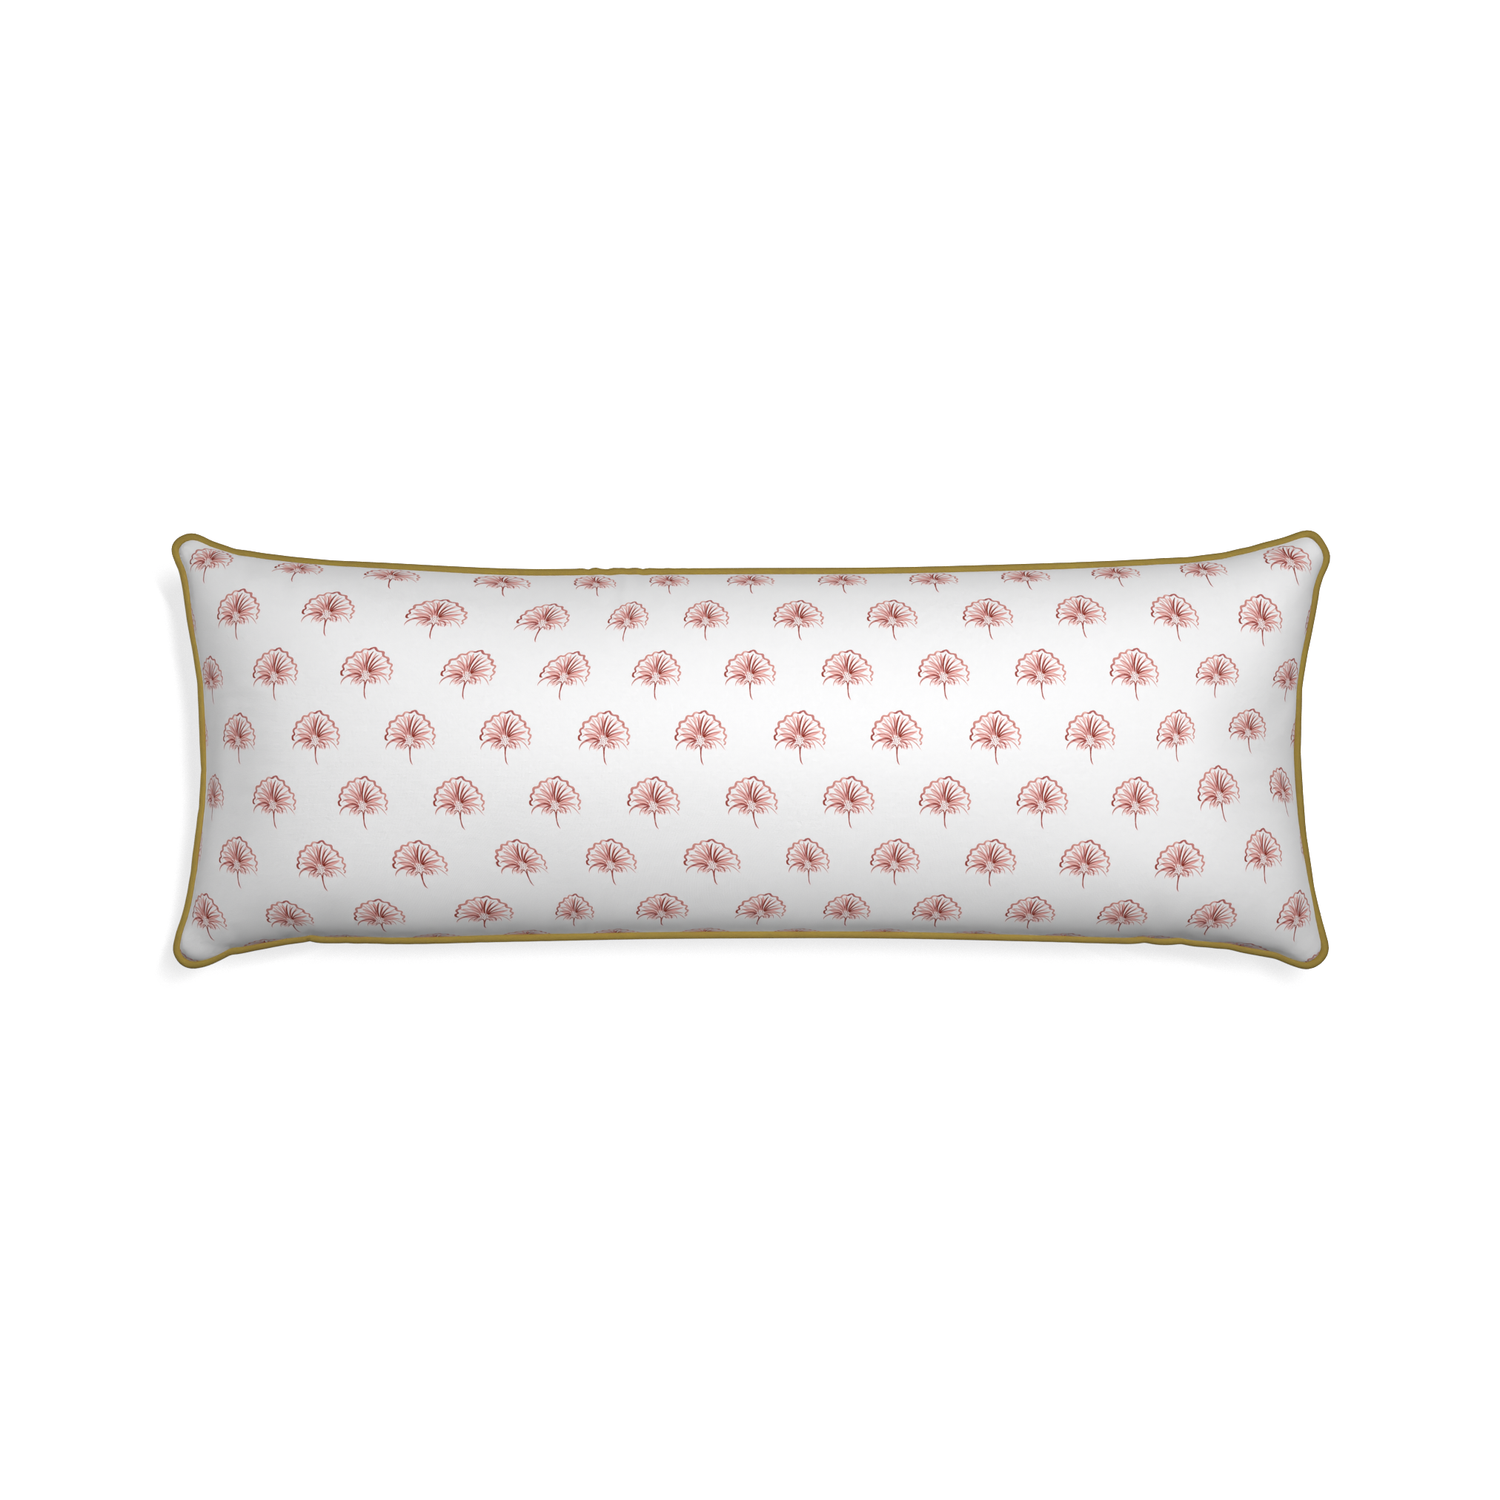 Xl-lumbar penelope rose custom floral pinkpillow with c piping on white background